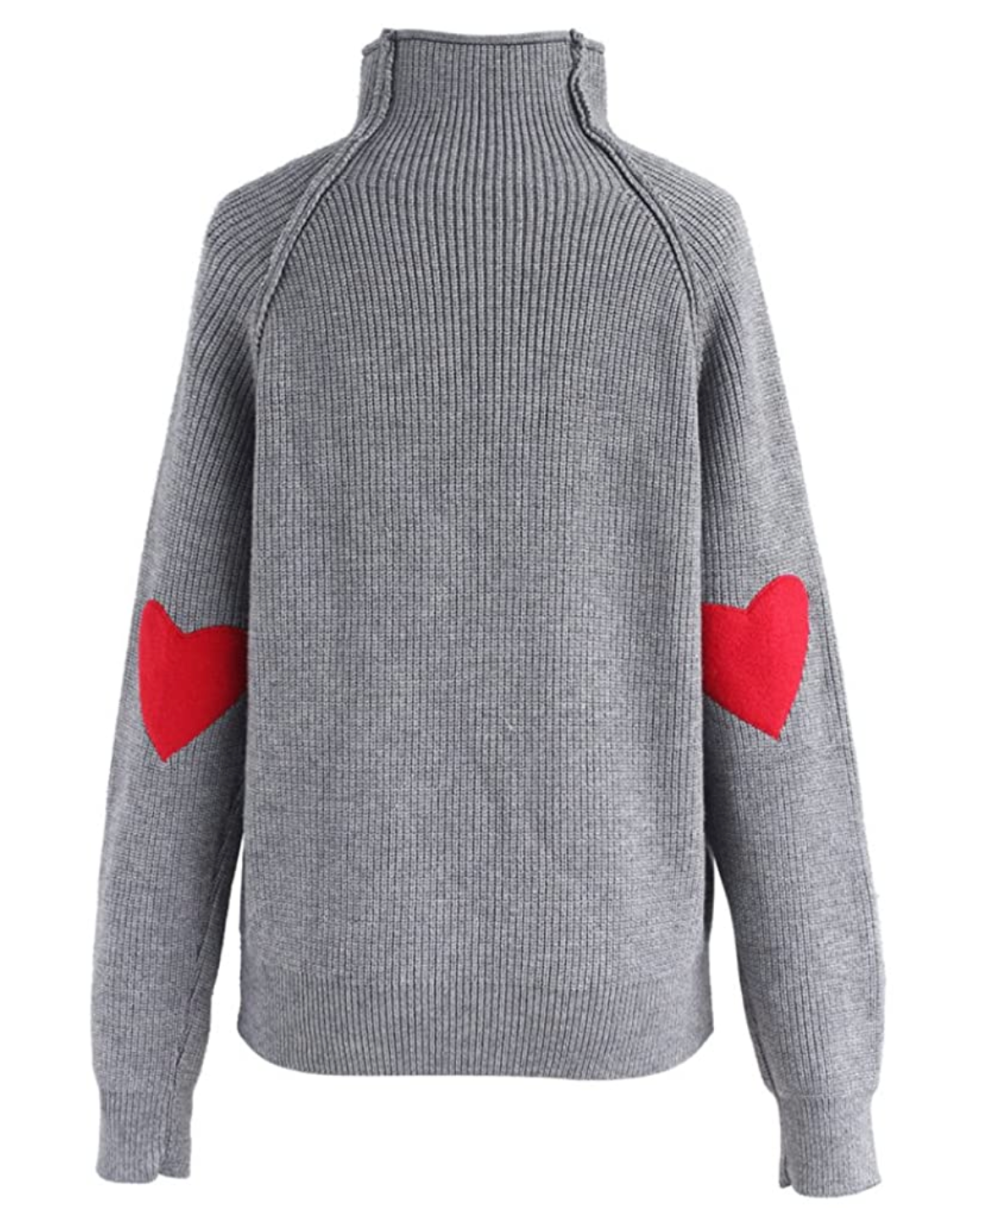 Chicwish Women's Comfy Casual Long Sleeve Heart Shape Patched Pullover Sweater